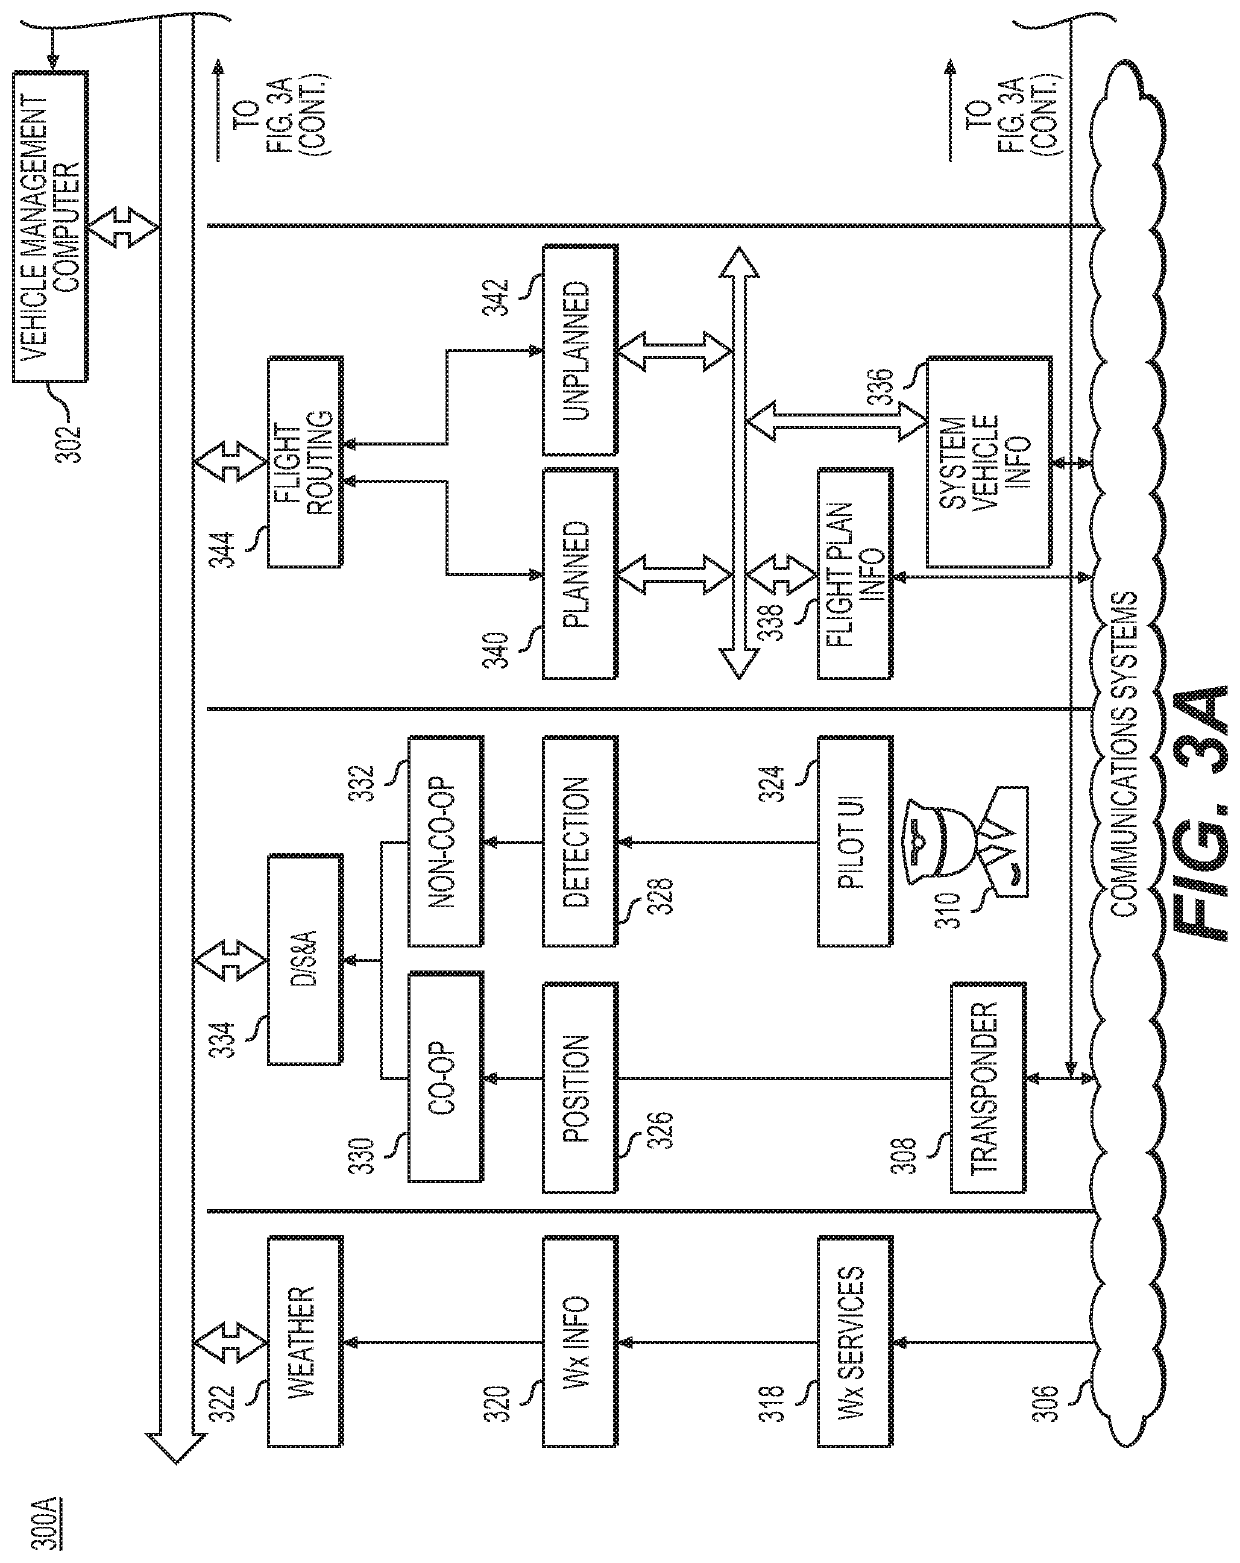 Systems and methods for managing energy use in automated vehicles